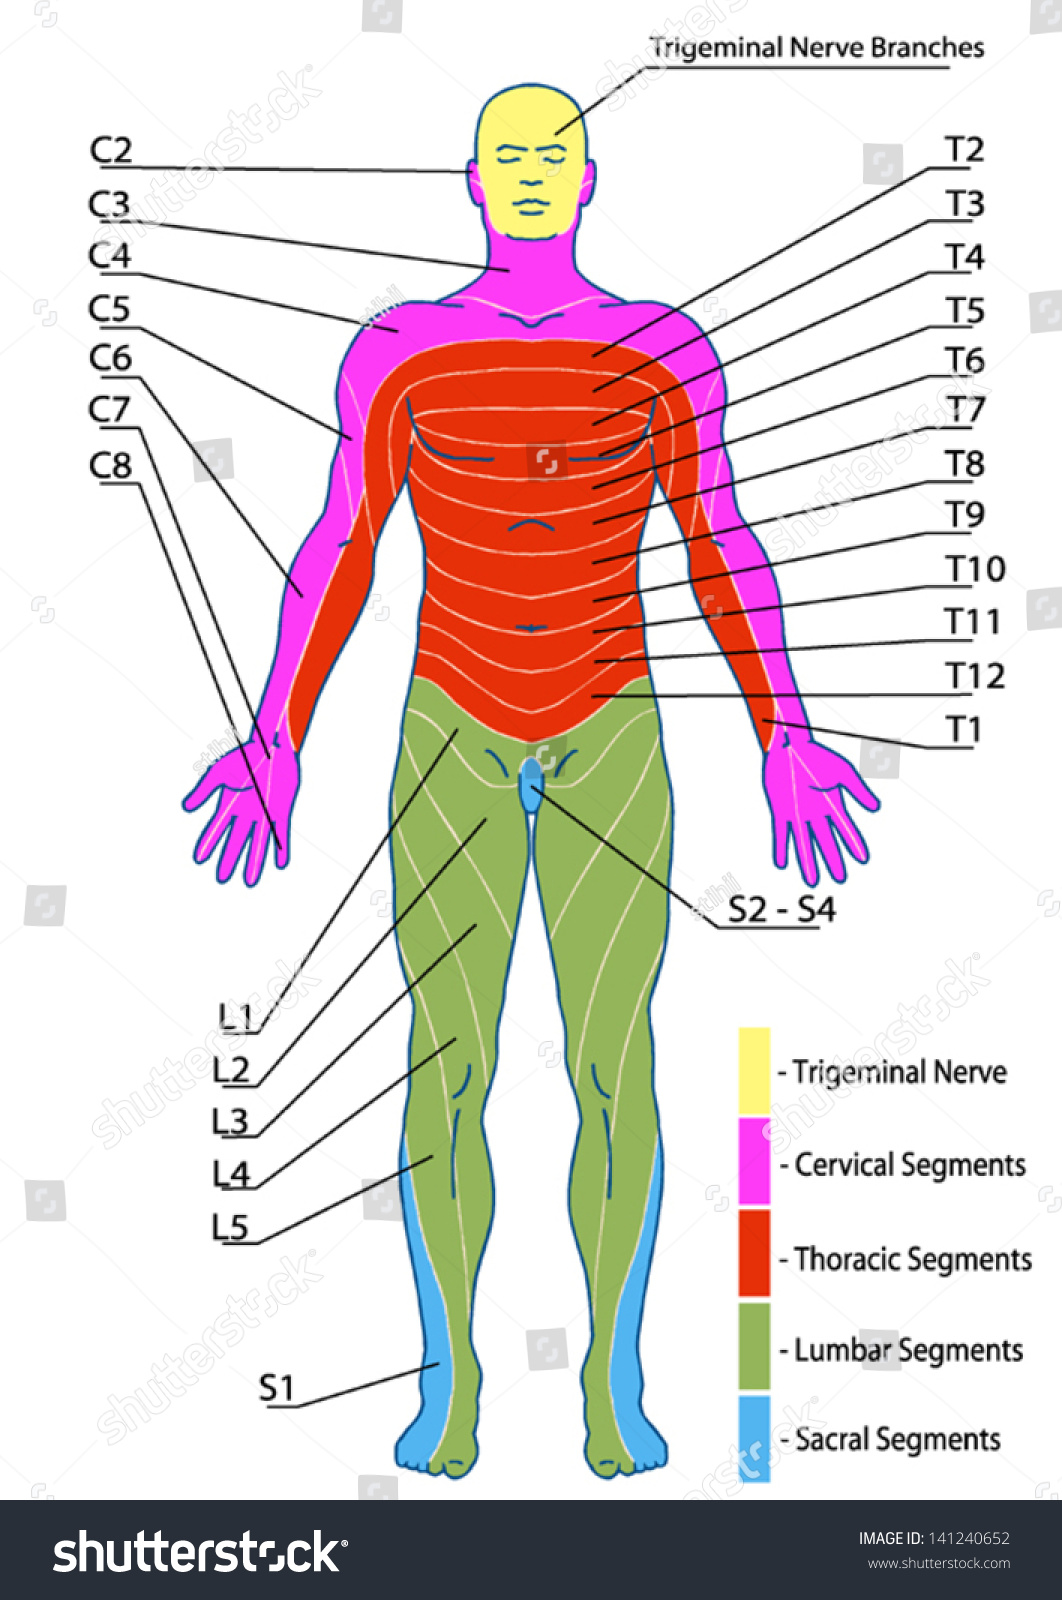 Drawing Medical Didactic Board Anatomy Human Stock Vector 141240652 - Shutterstock-4875